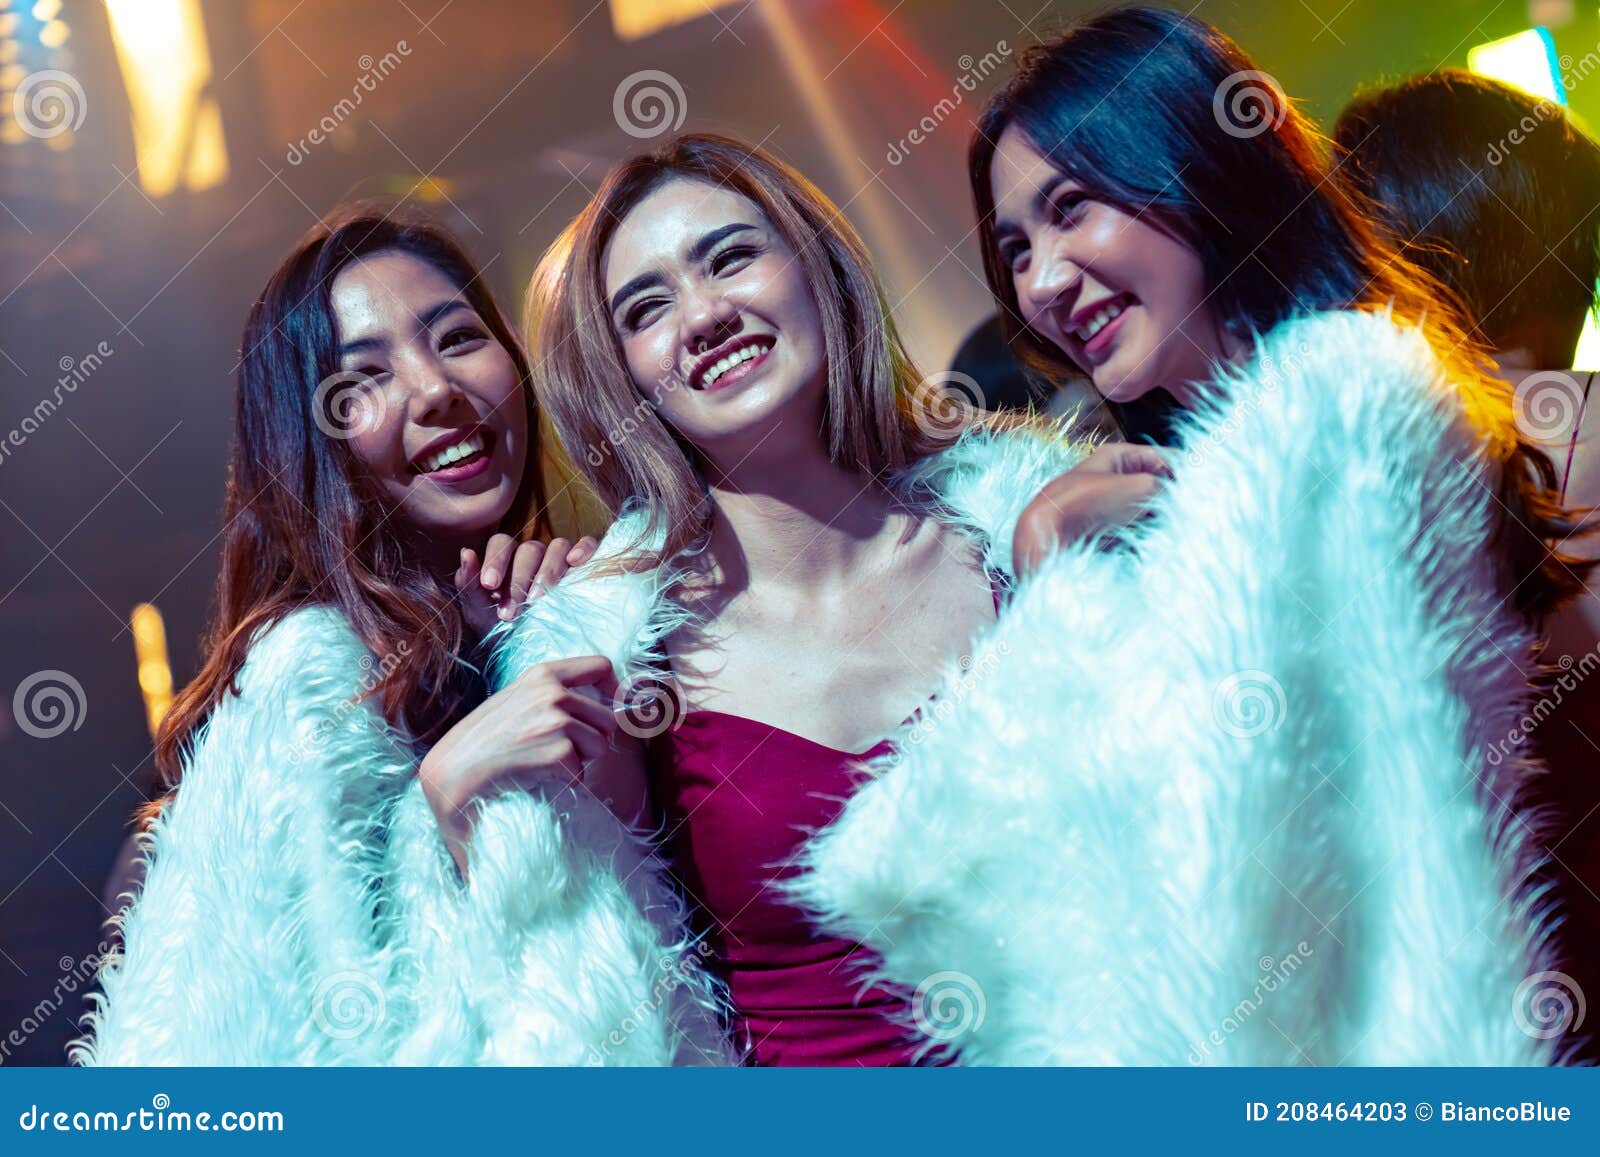 Group Of Women Friend Having Fun At Party In Dancing Club Stock Image Image Of Birthday